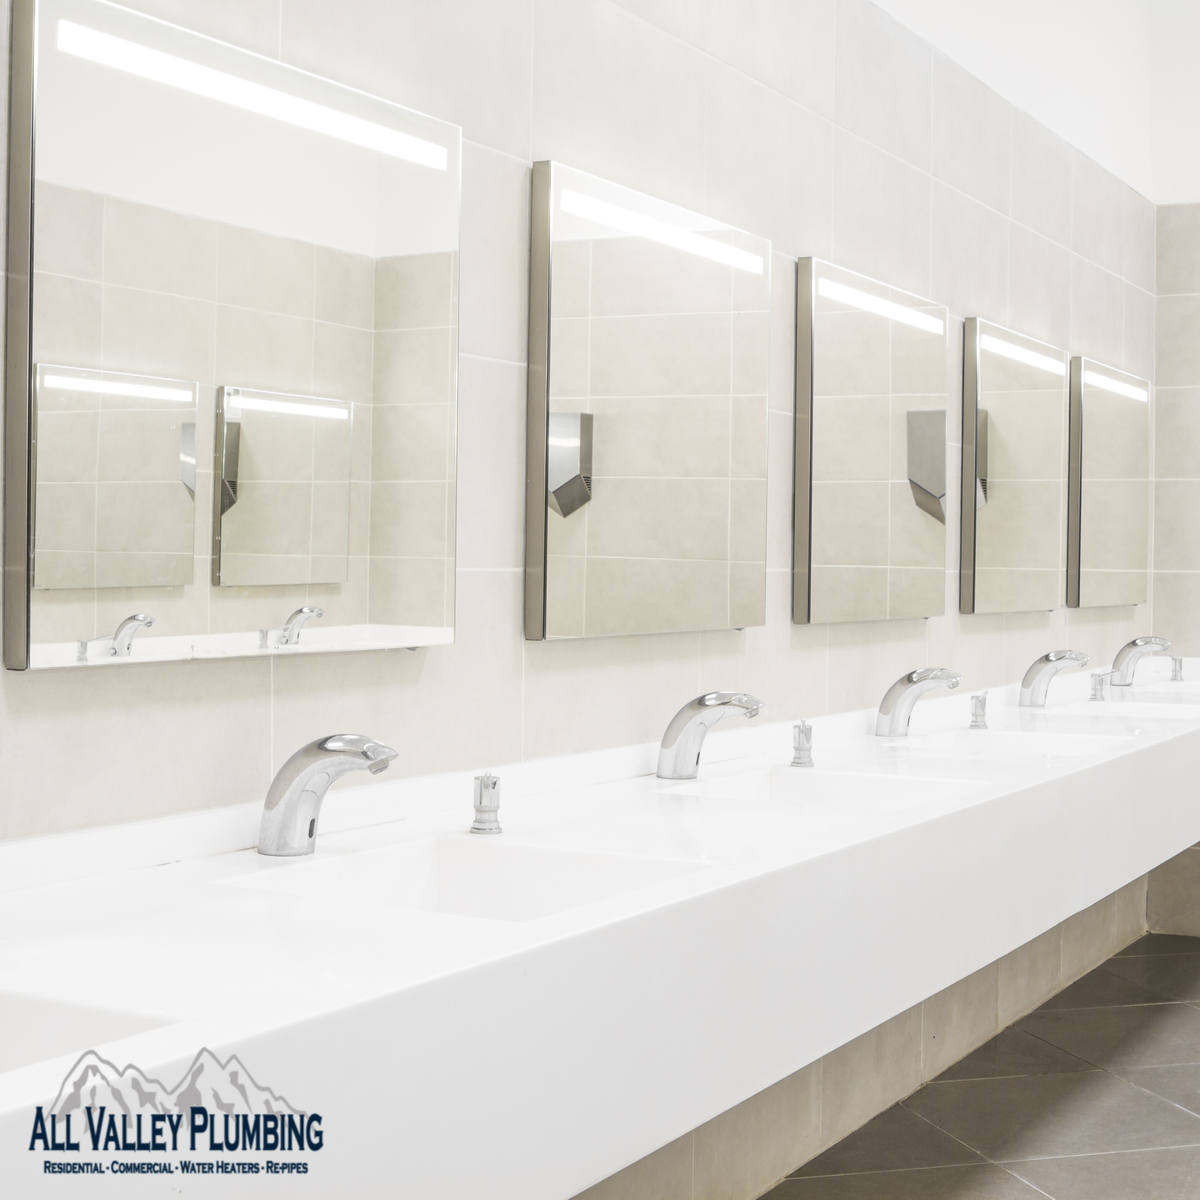 What Makes Commercial Plumbing In Mukilteo Different Than Residential Plumbing?